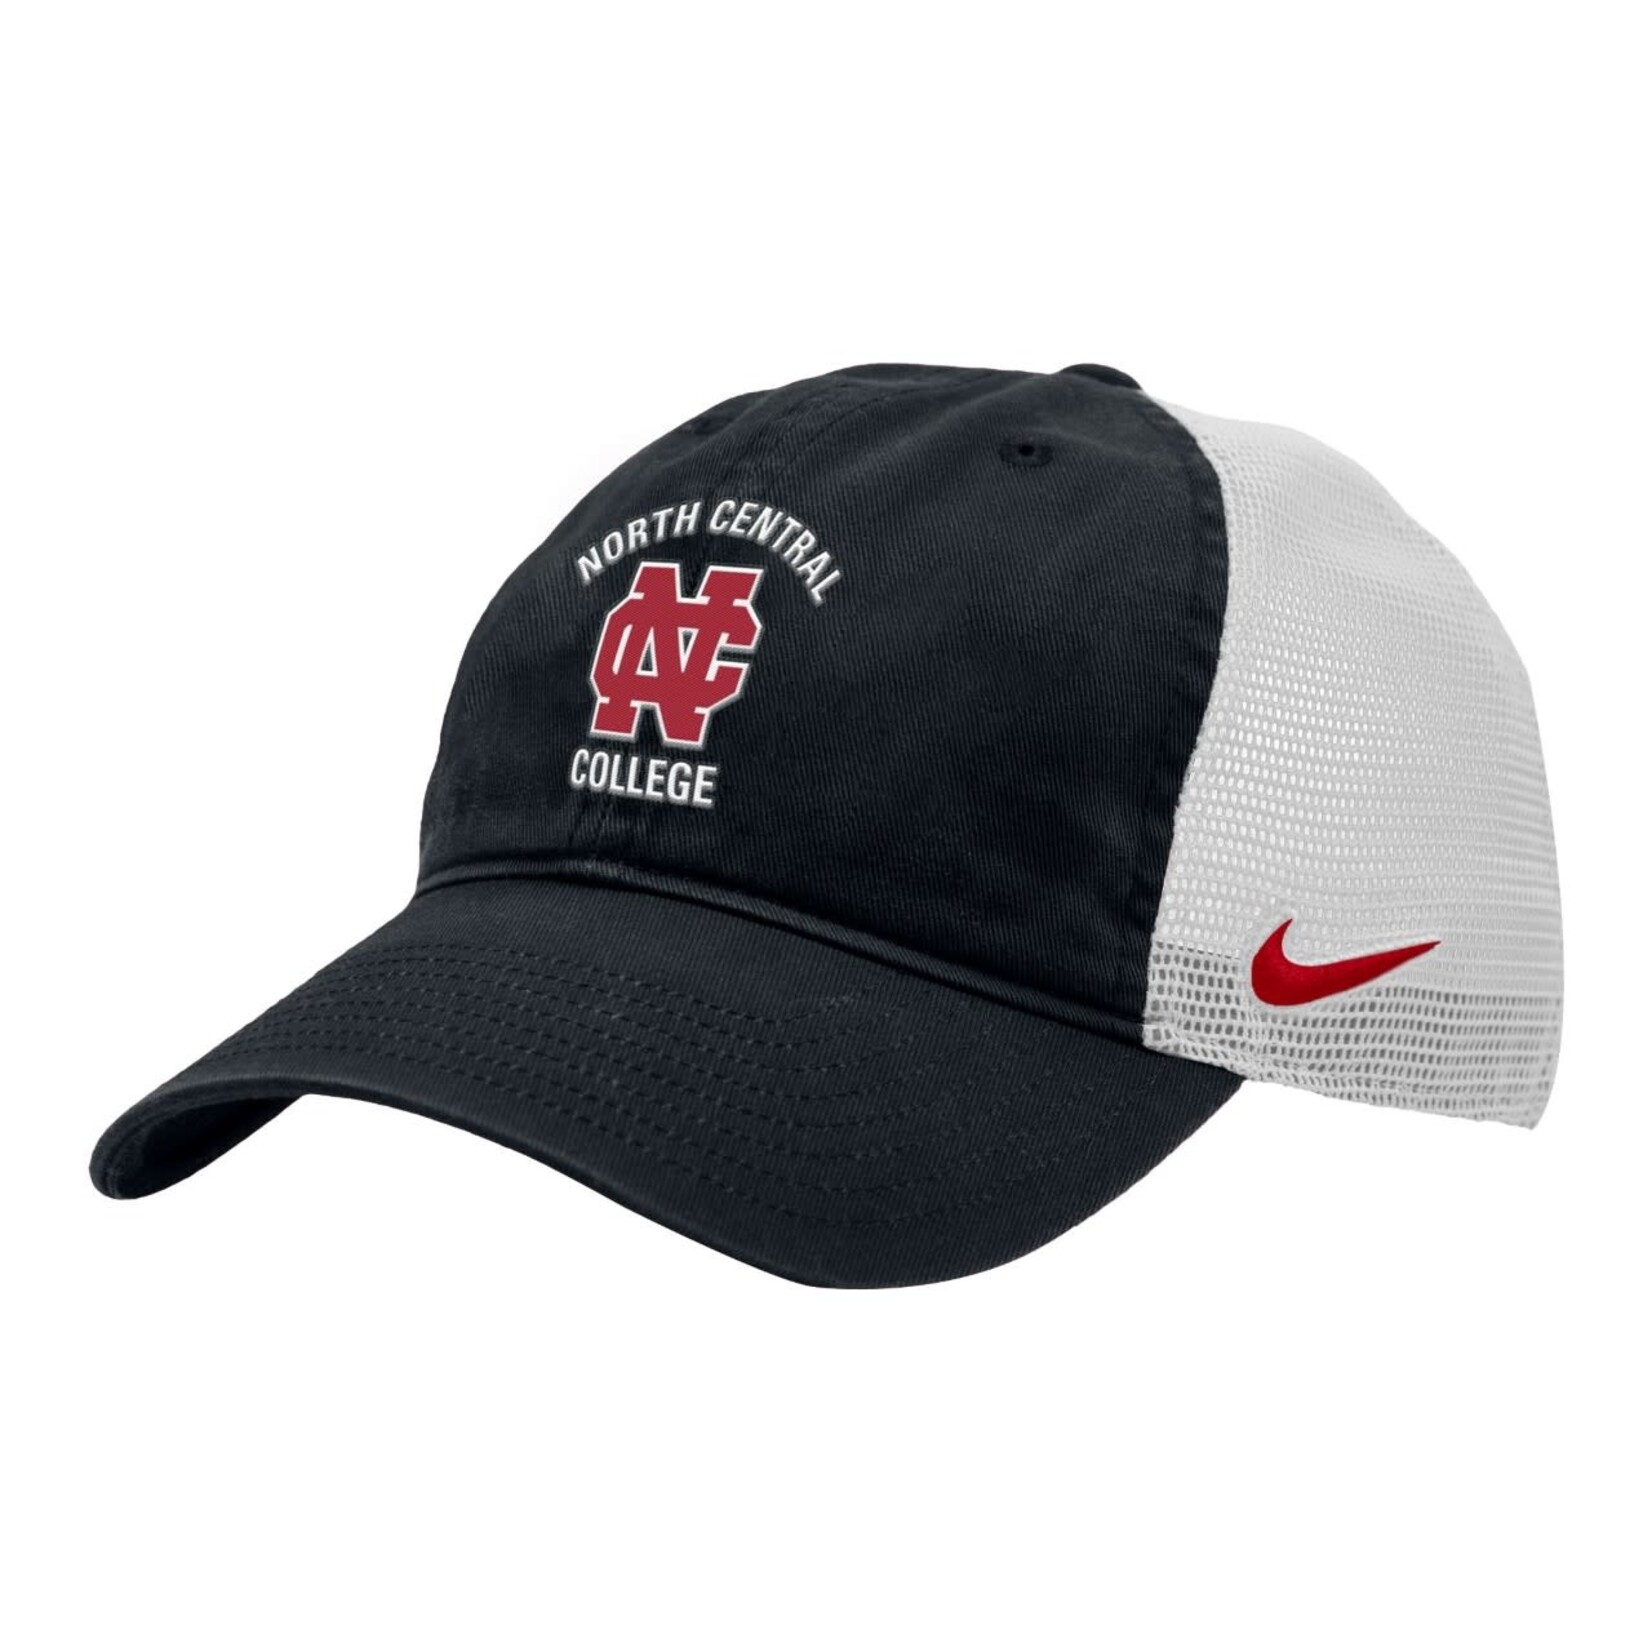 Nike North Central College Nike Washed Trucker hat